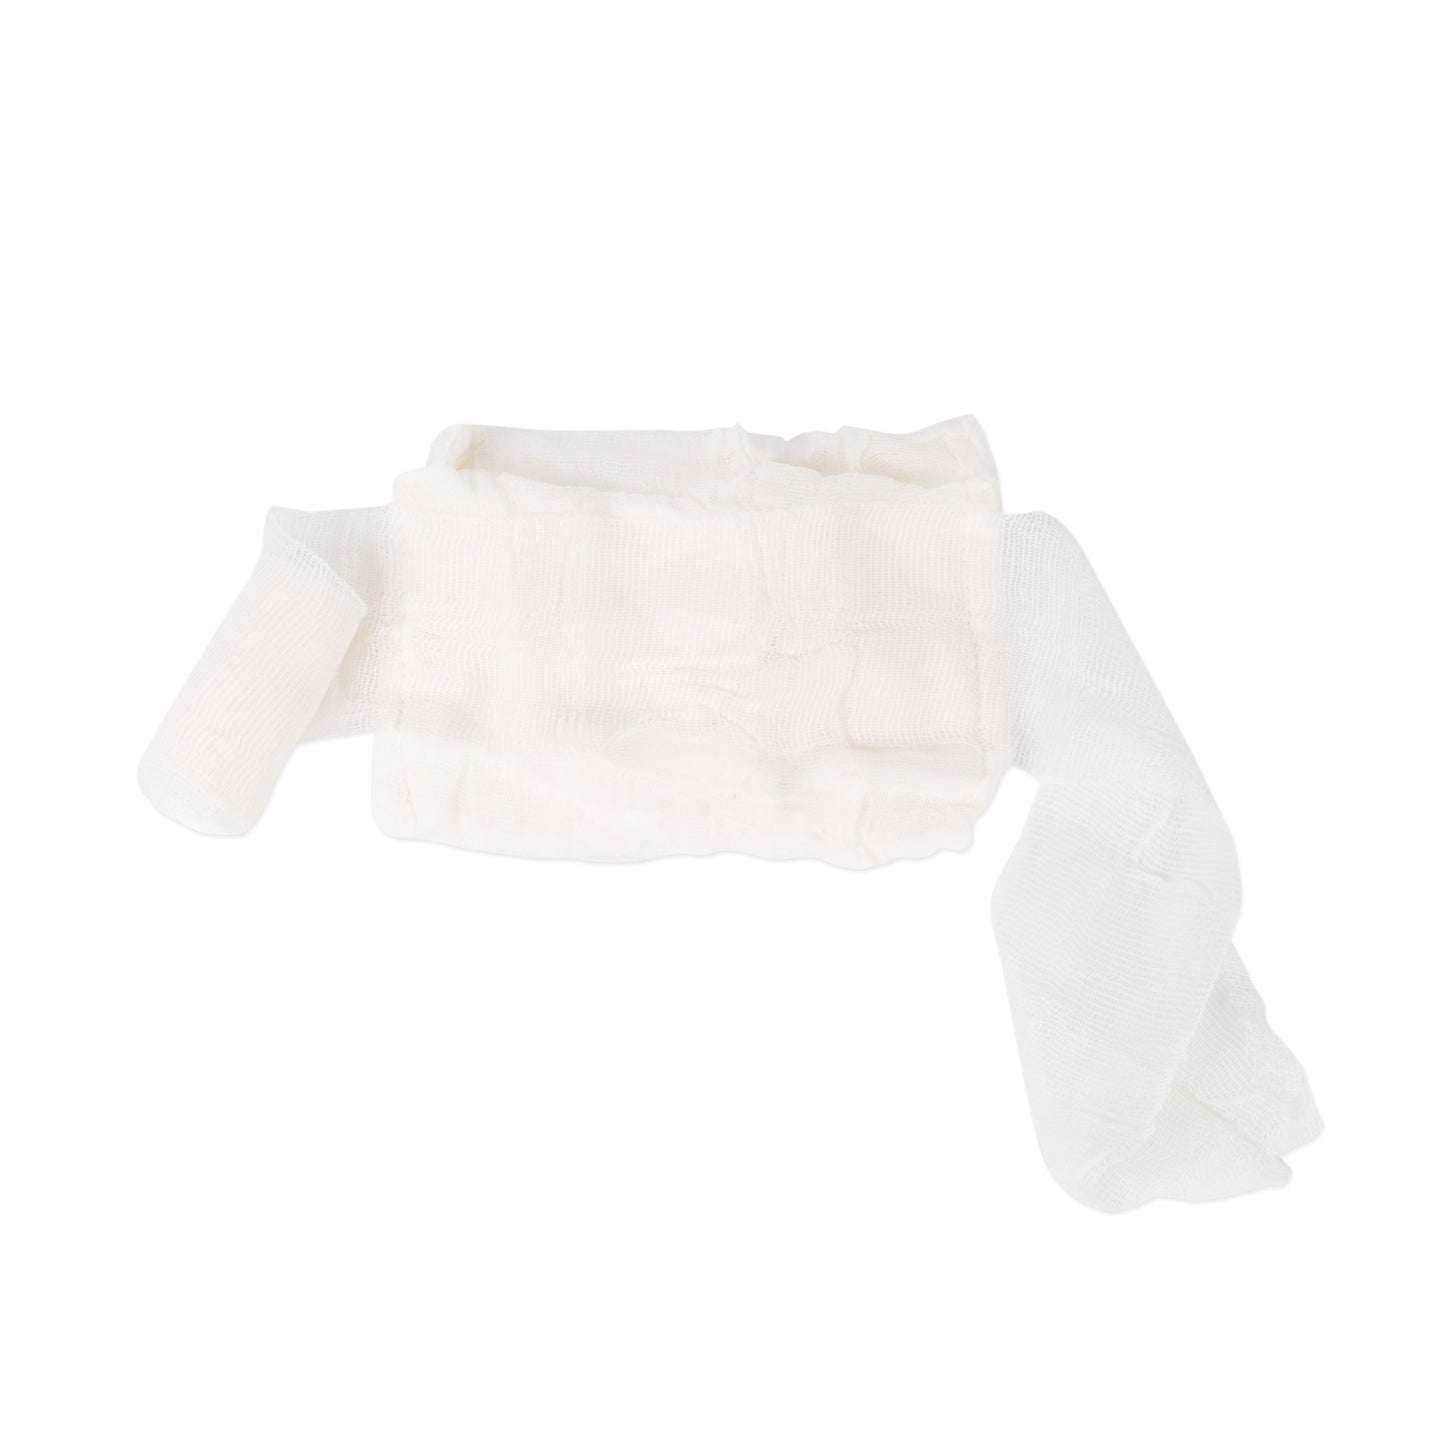 Wound Dressing No.13 Small 10204048